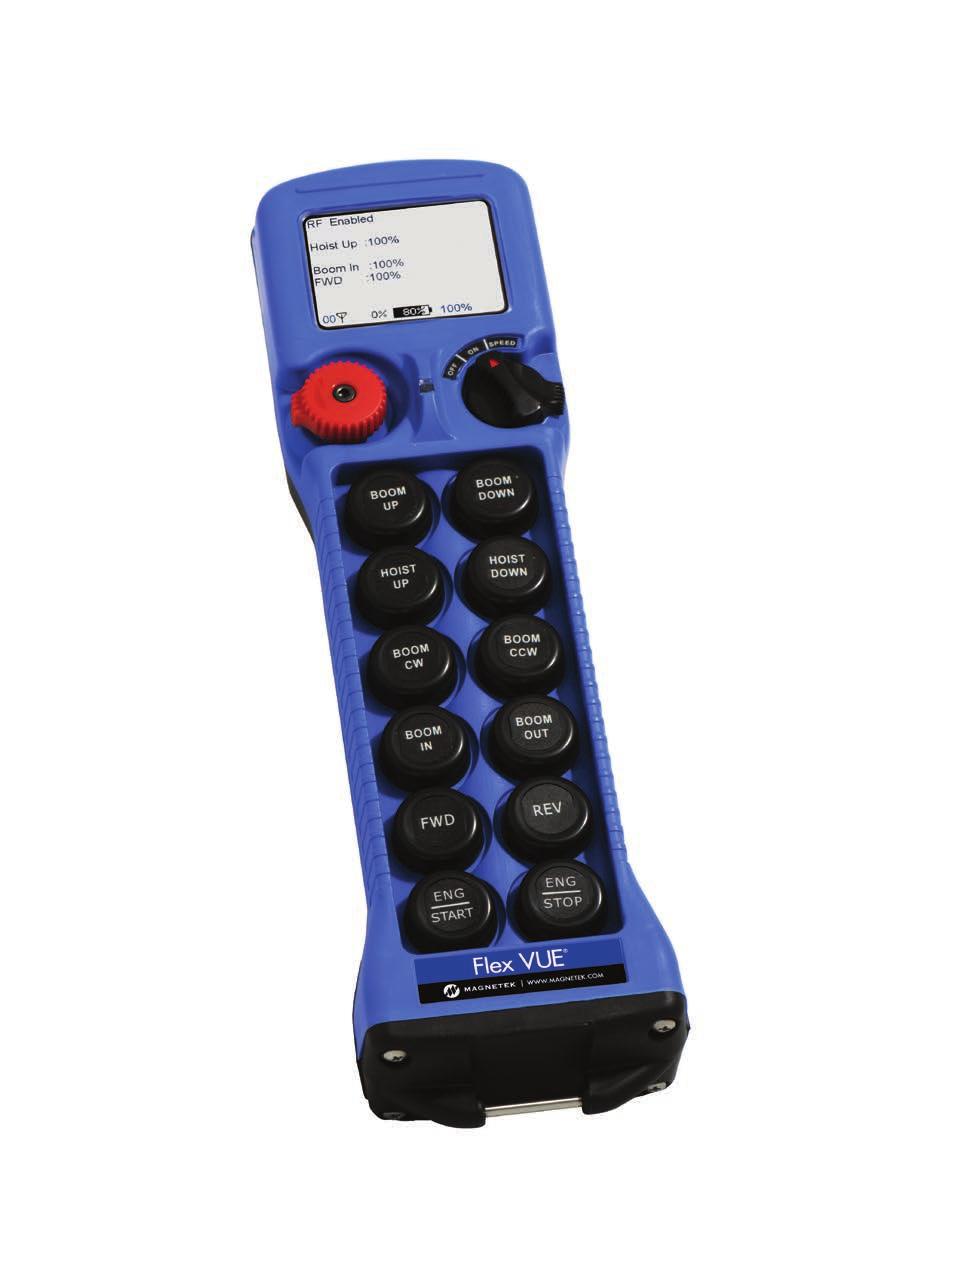 RADIO REMOTE CONTROLS TRANSMITTERS FLEX VUE TRANSMITTER Available with several options to meet the needs of a variety of applications and industries Choose between 4, 8, and 12 two-step or stepless